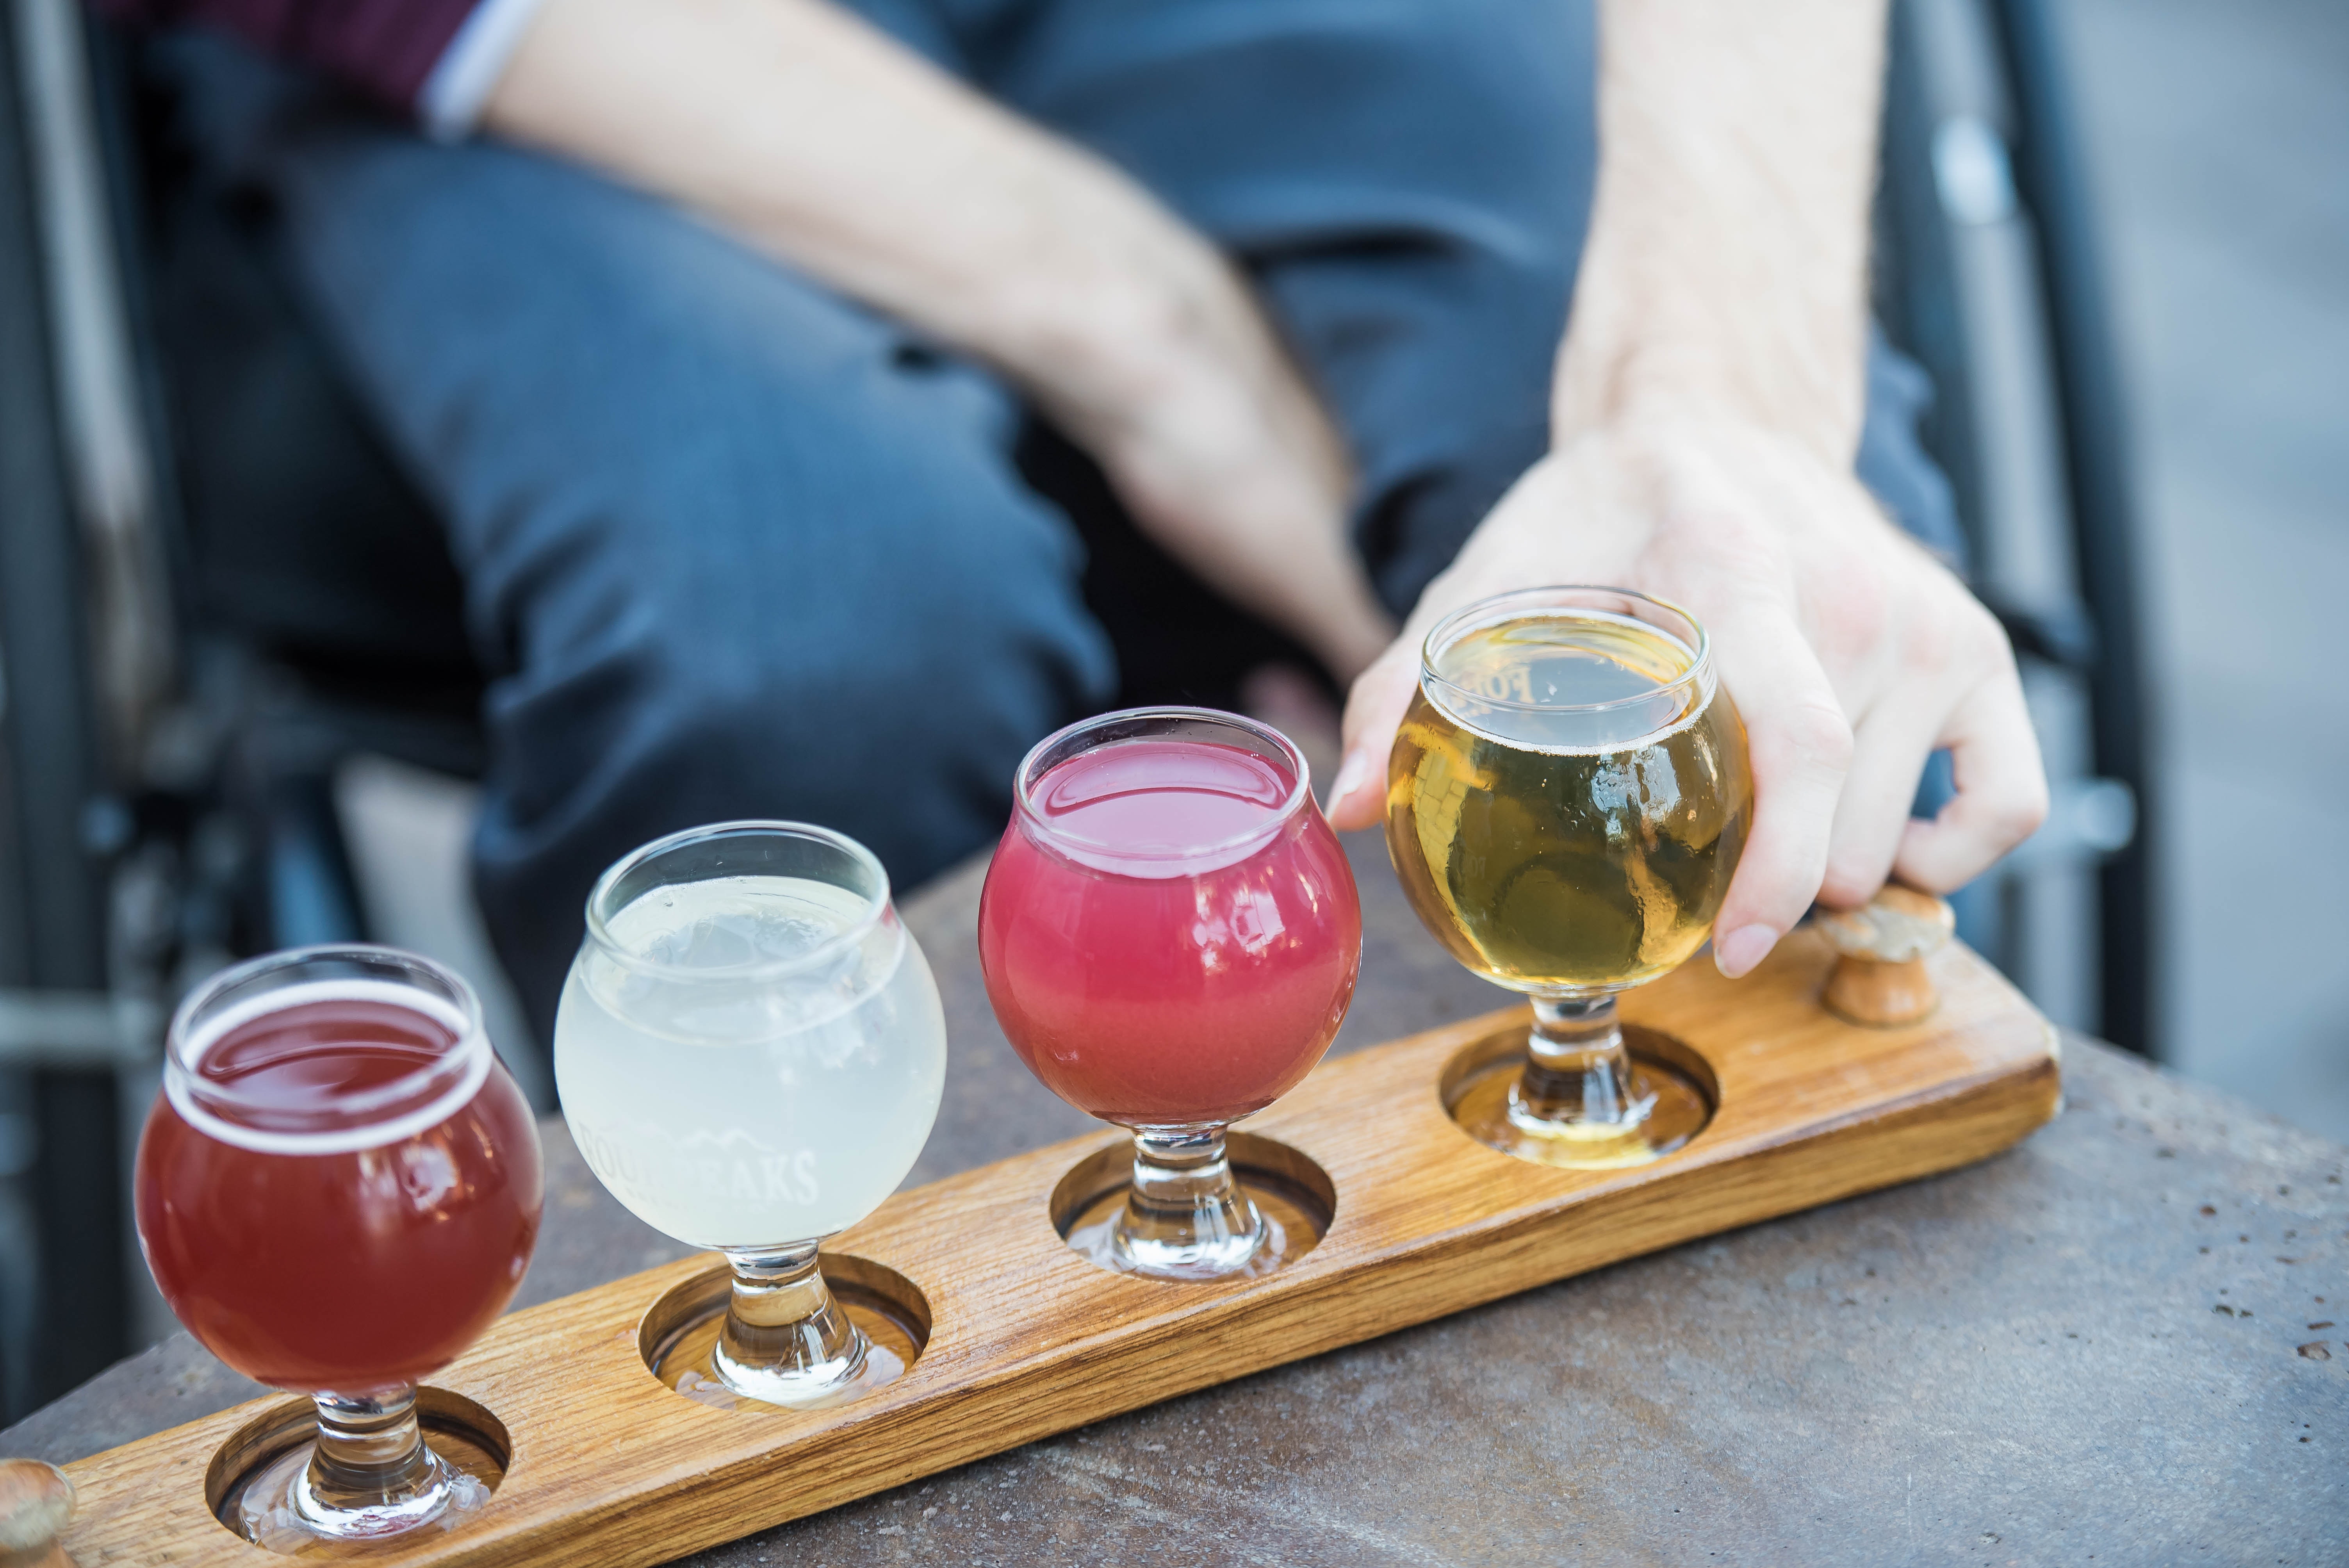 Four tasting glasses on a wooden board